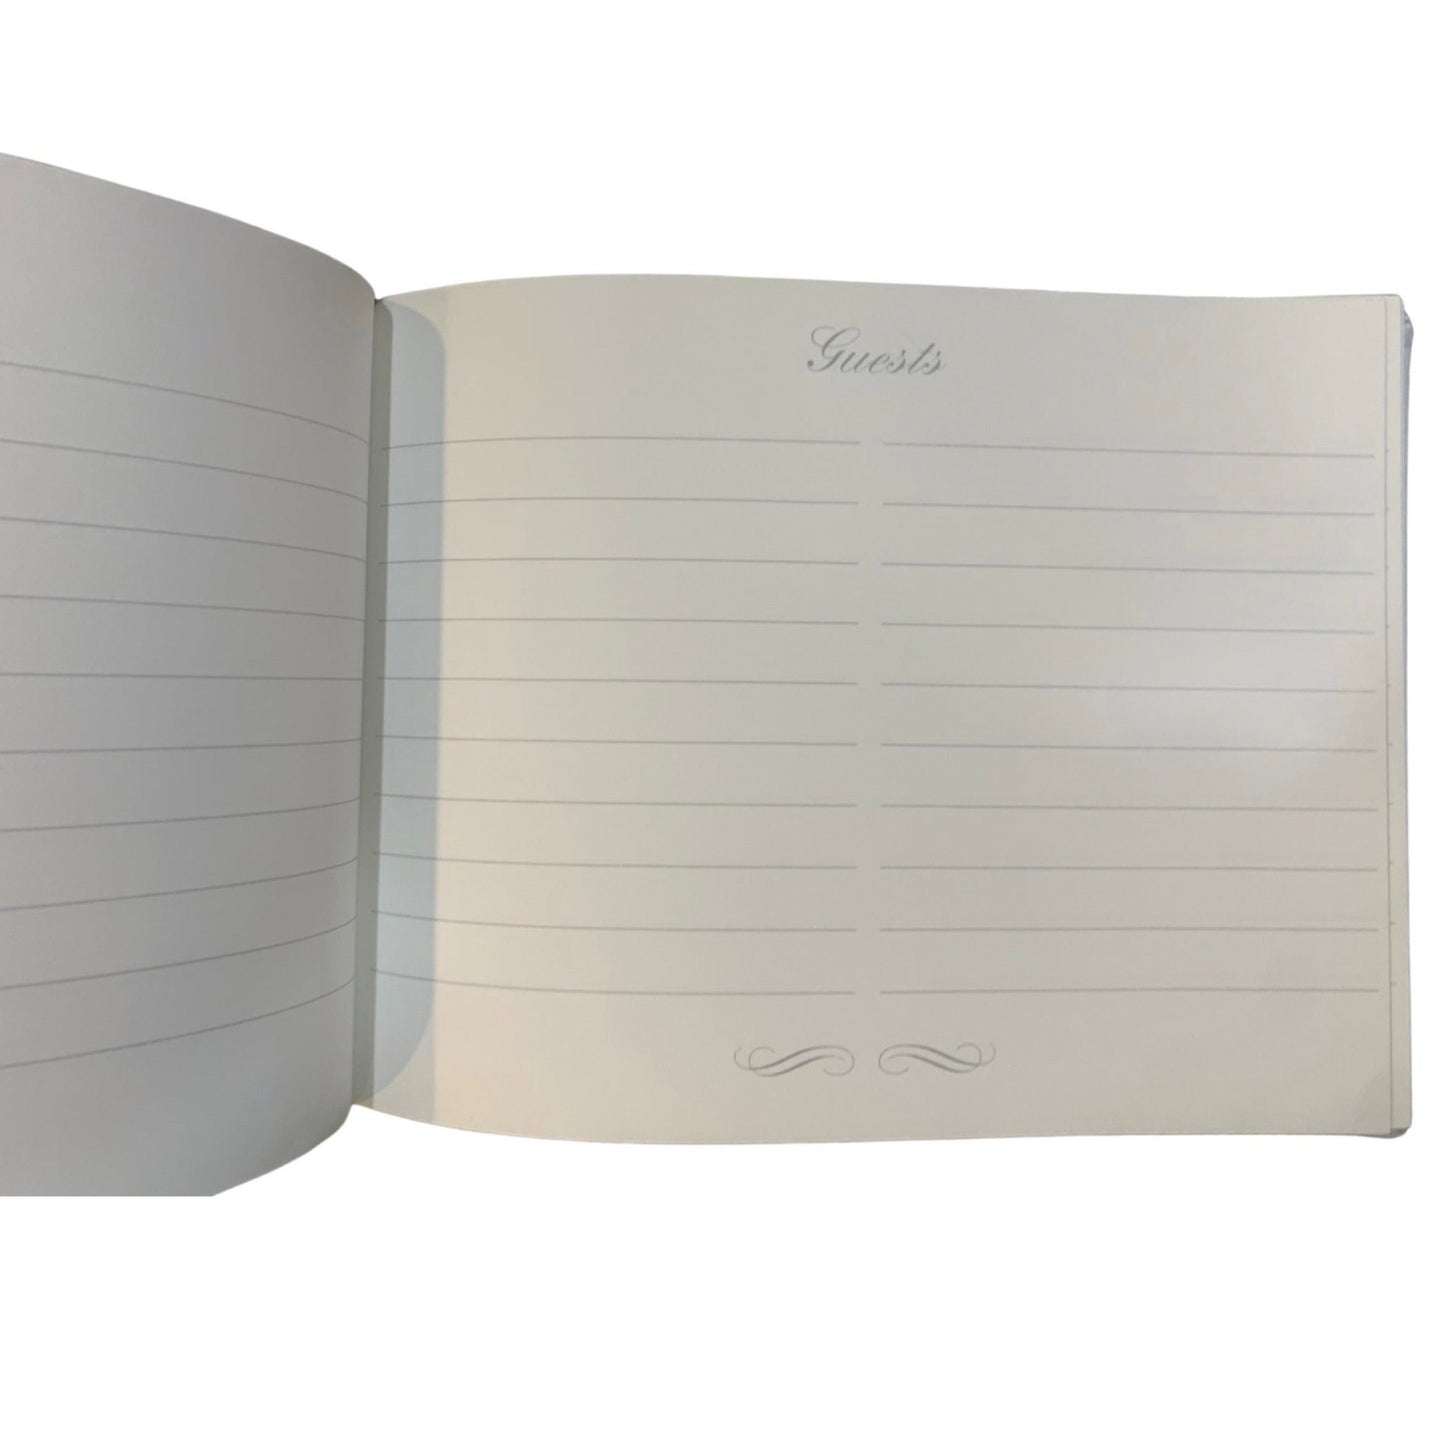 Classic White Leather Wedding Guest Book | Katherine & Teddy | 7 by 9 Inches Horizontal | Buffalo Embossed Calf Leather | GUESTS